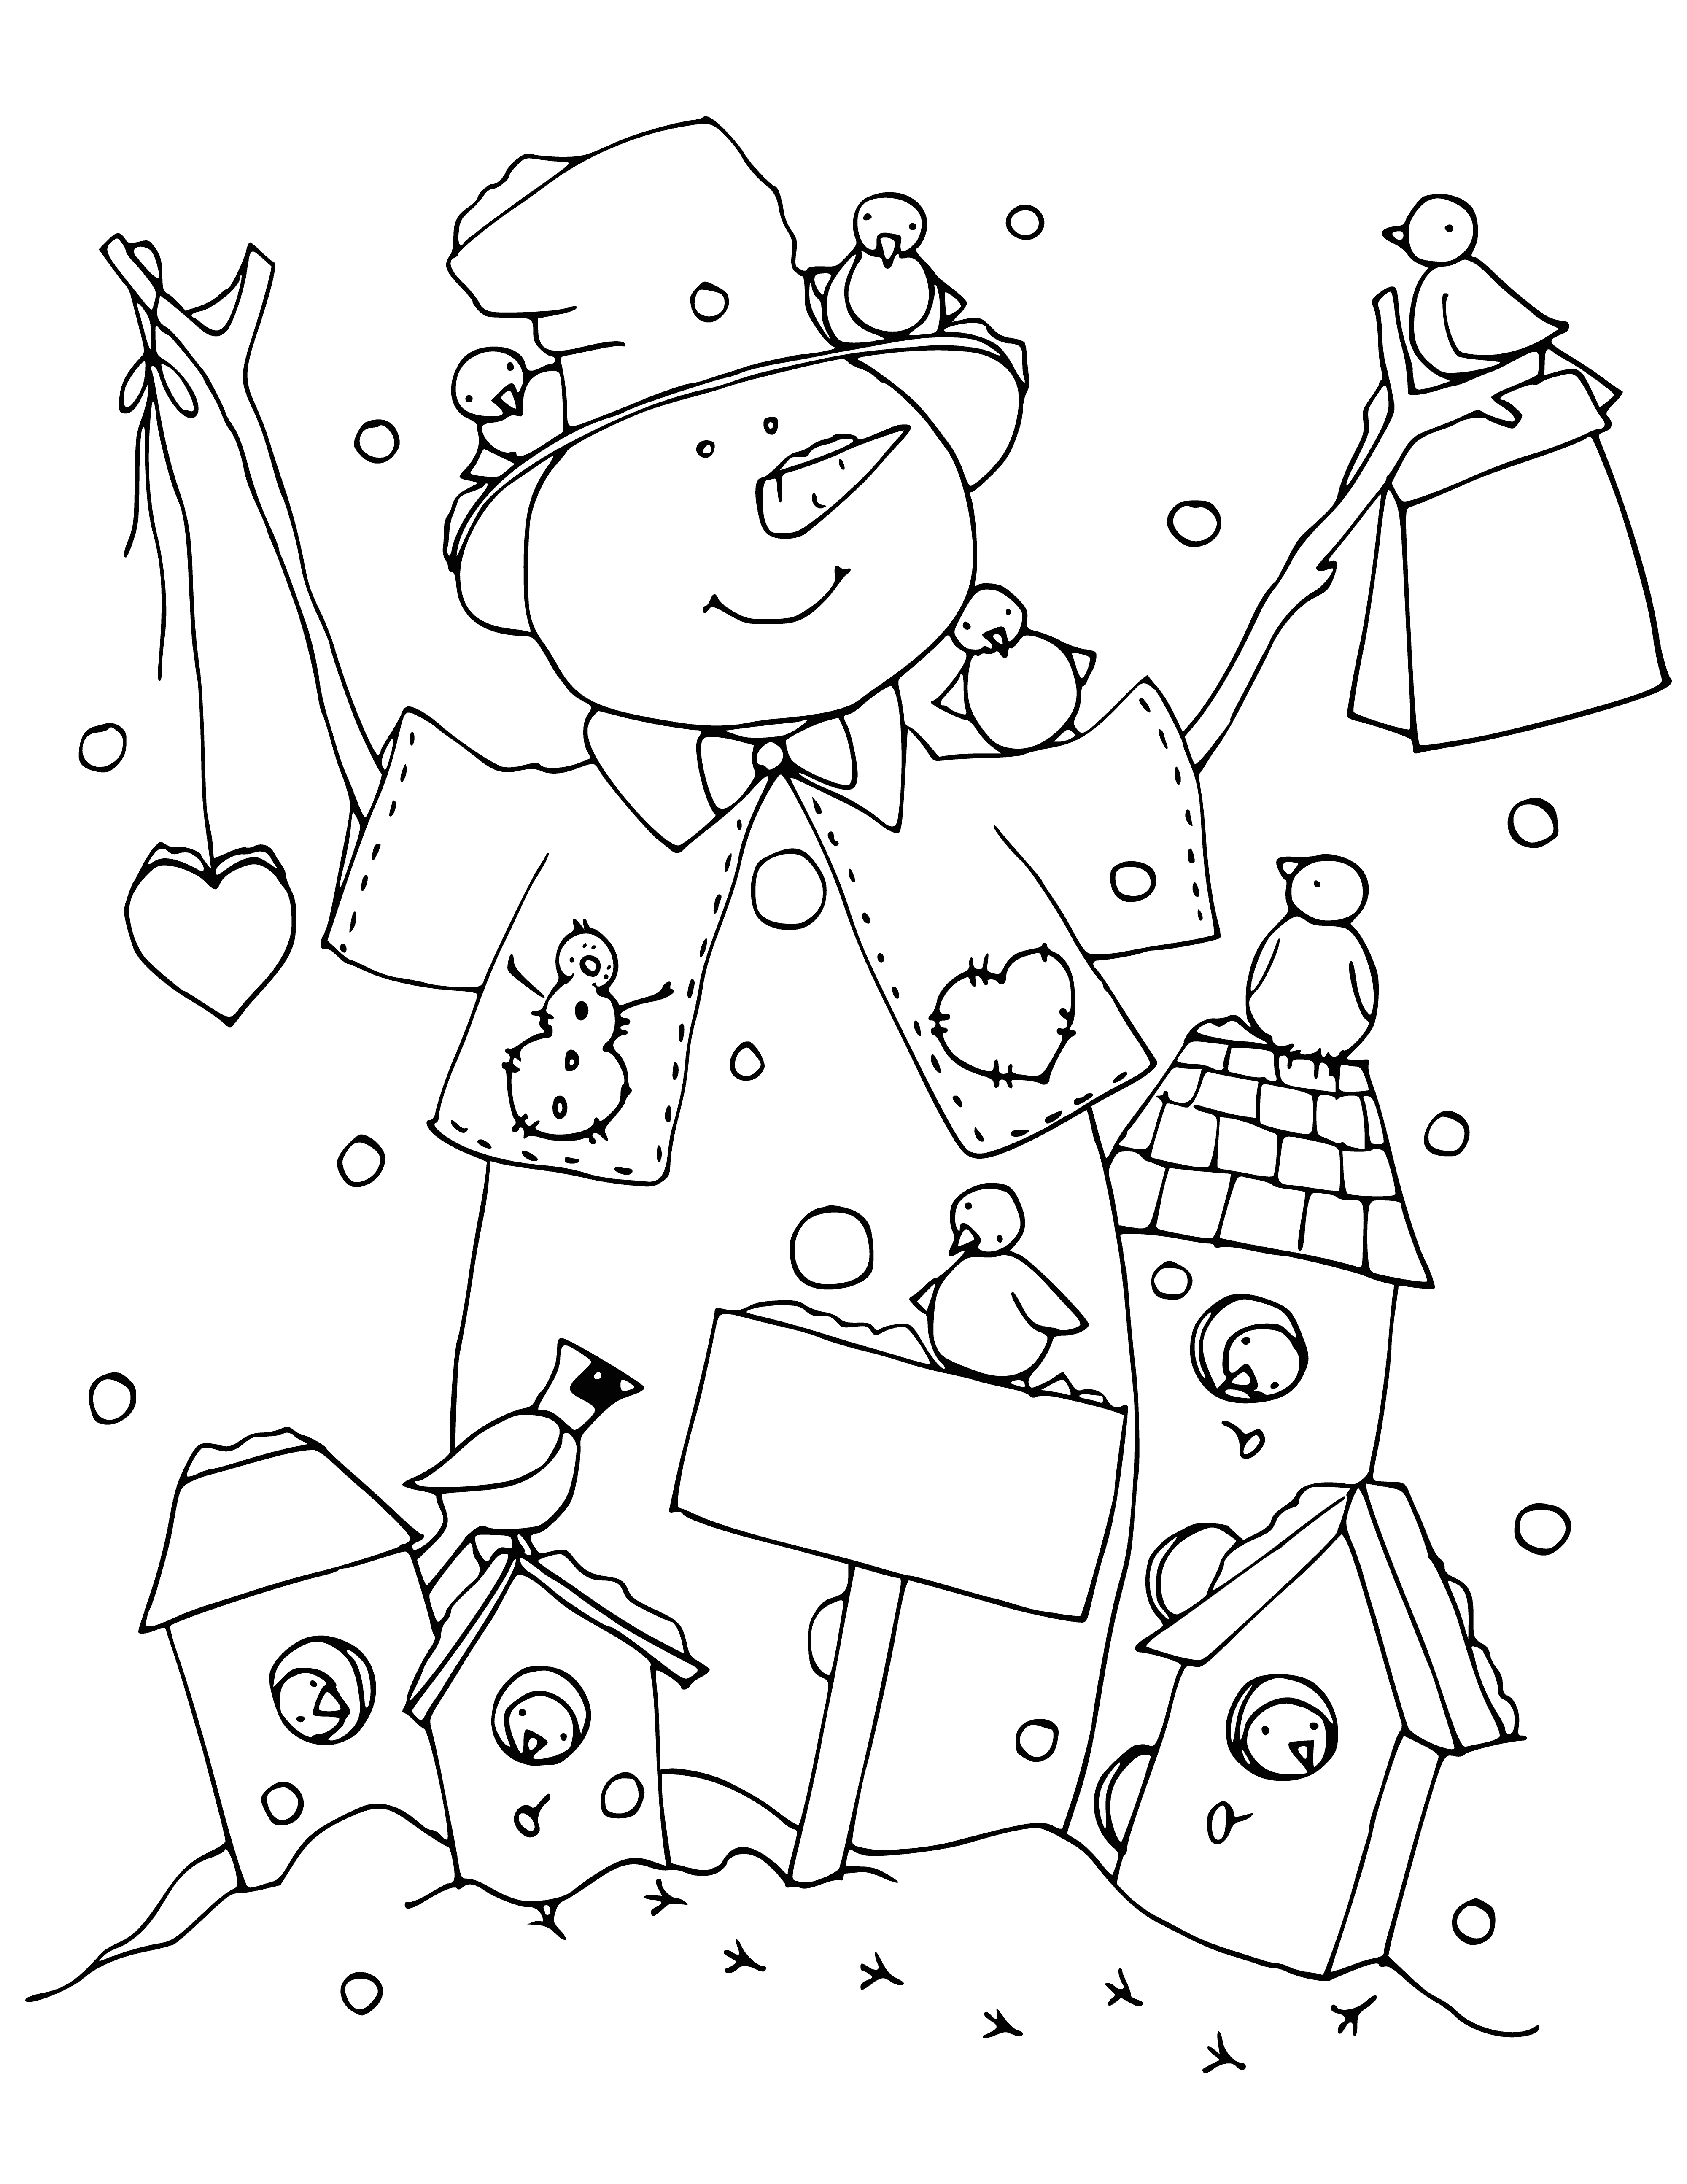 coloring page: Two snowmen holding bird feeders: one blue, one yellow. Wearing hats & scarves, with coal eyes & mouths. #winterfun